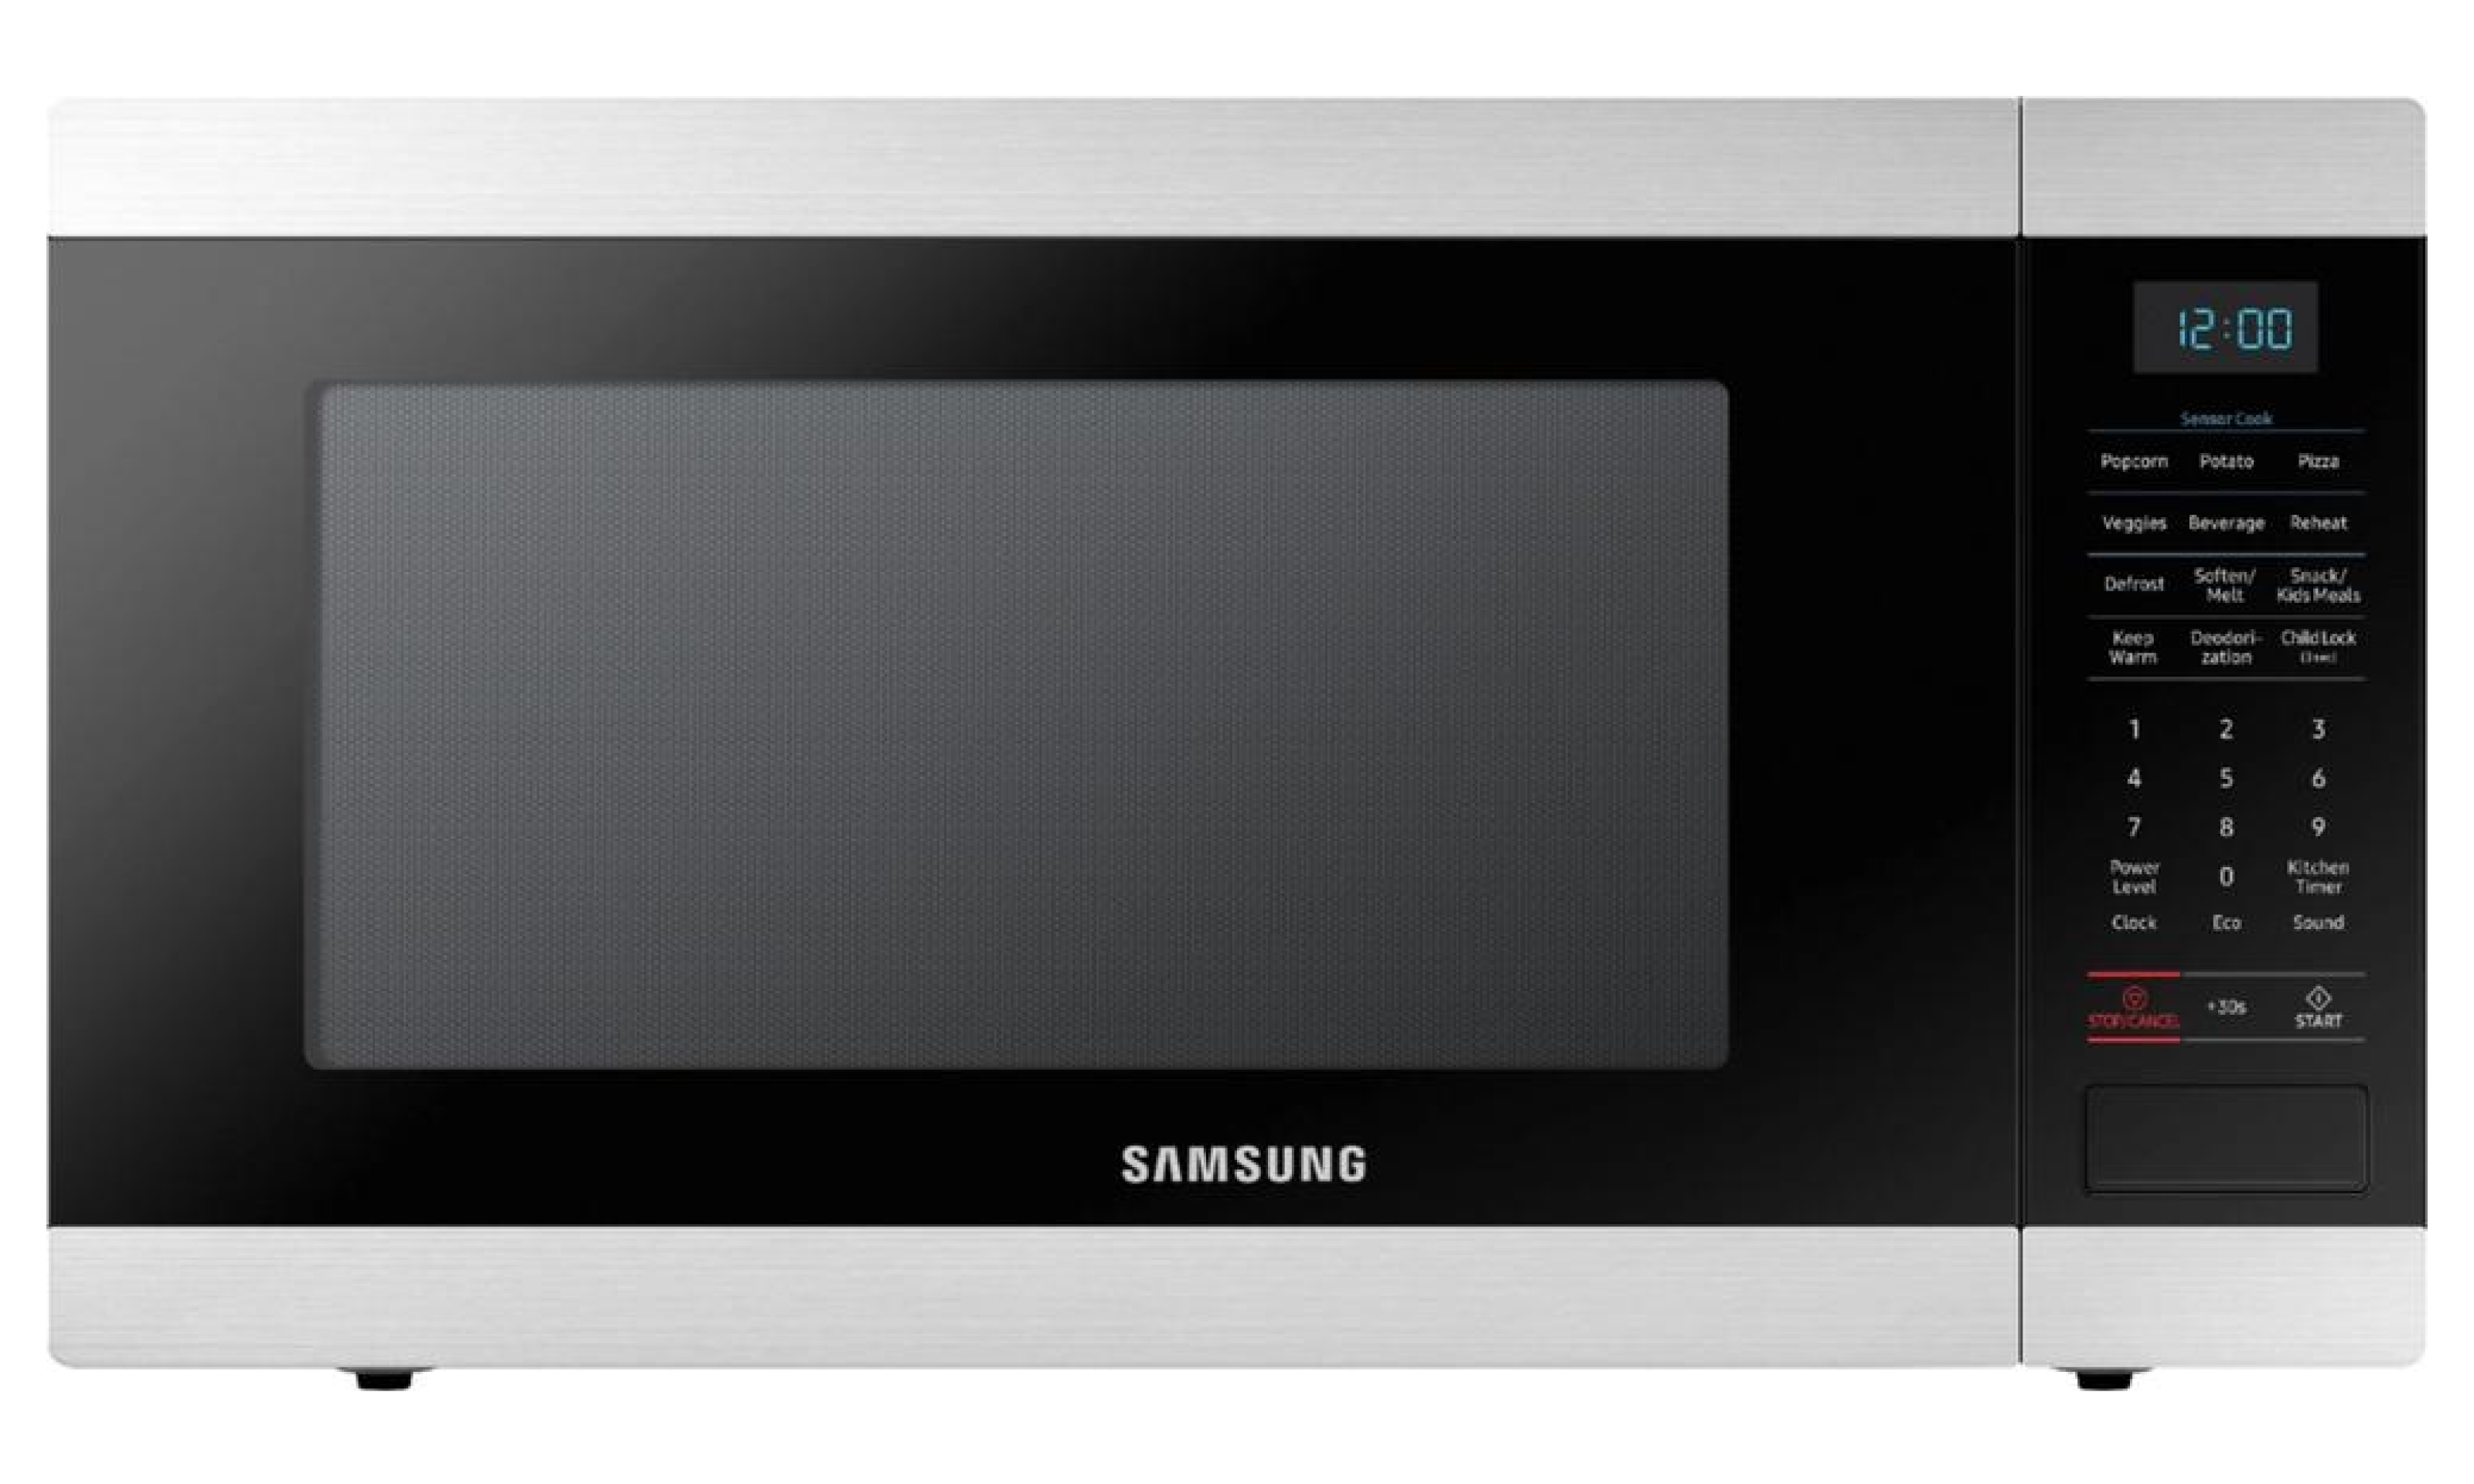 Samsung 1.9 cu. ft. Countertop Microwave with Sensor Cook - Stainless steel - MS19M8000AS